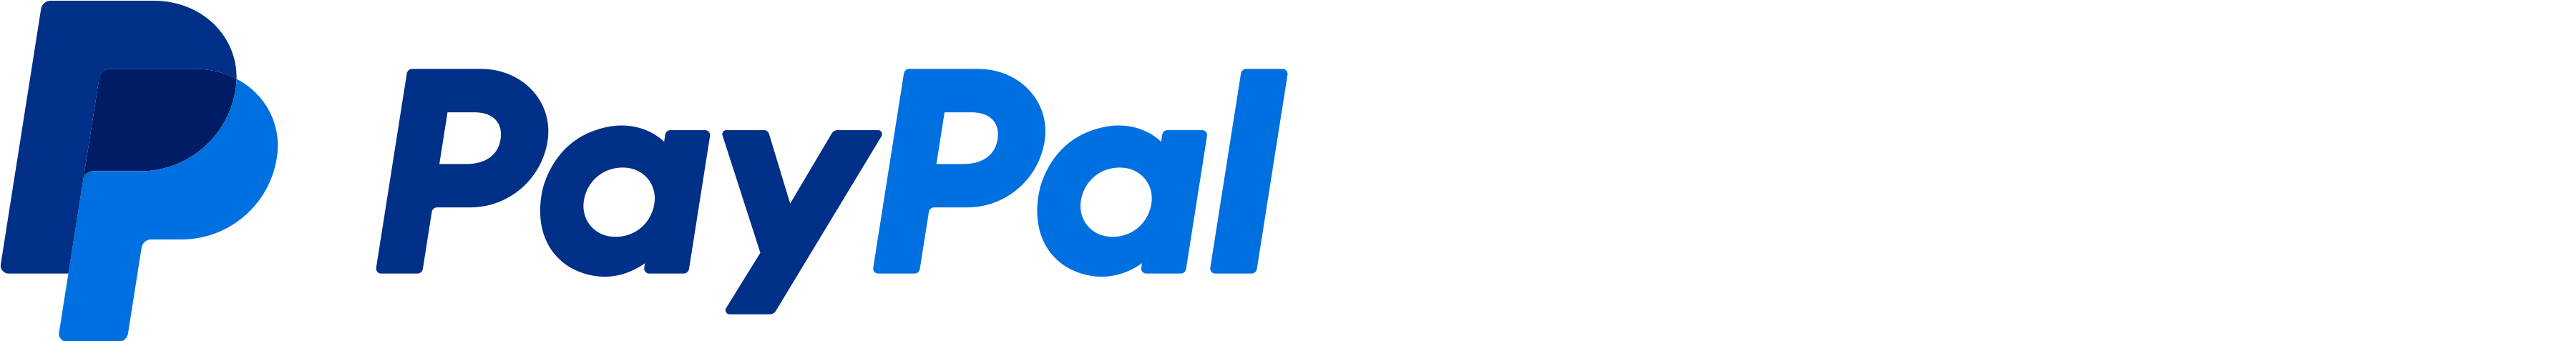 PayPal comes to Pivotal Tracker! blog post featured image